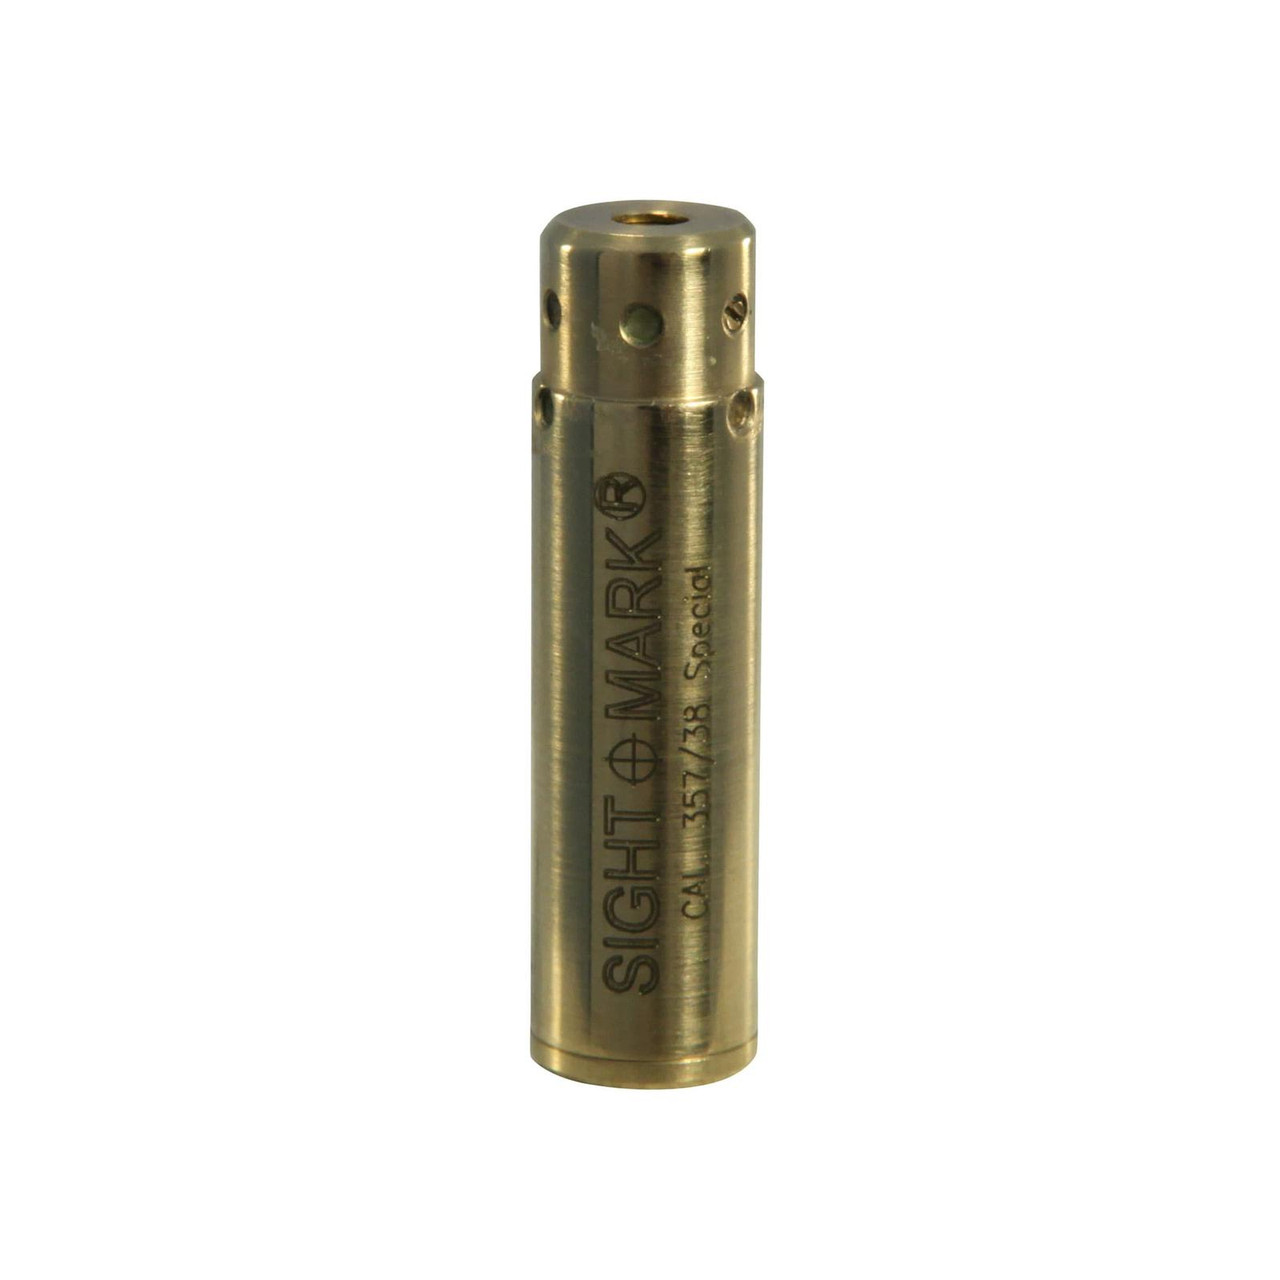 Sightmark .357/.38 Special Boresight for sale online 